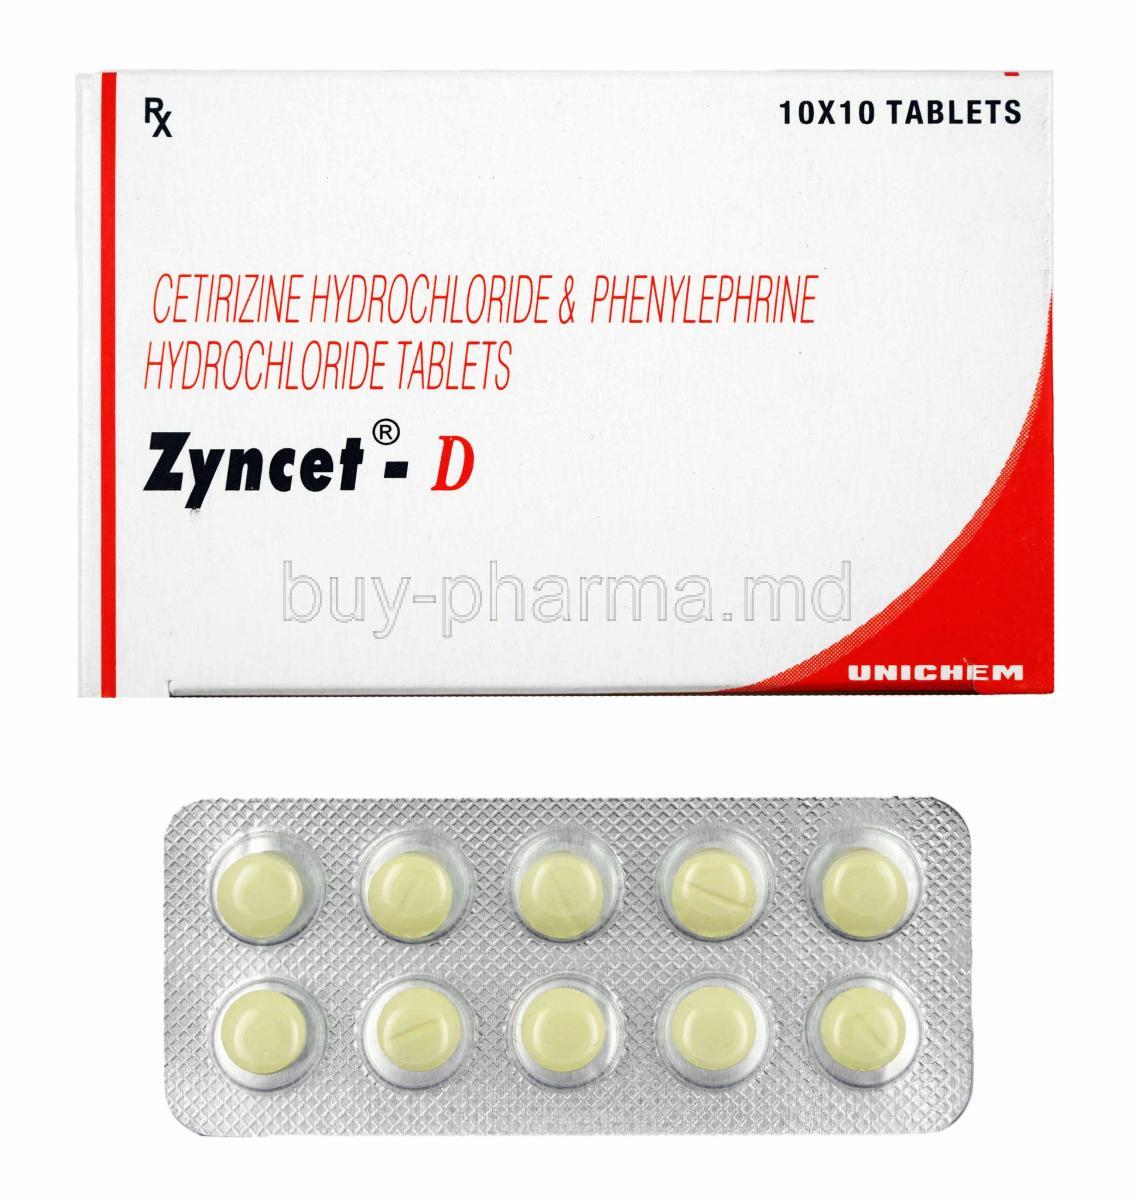 Zyncet-D, Cetirizine and Phenylephrine box and tablets